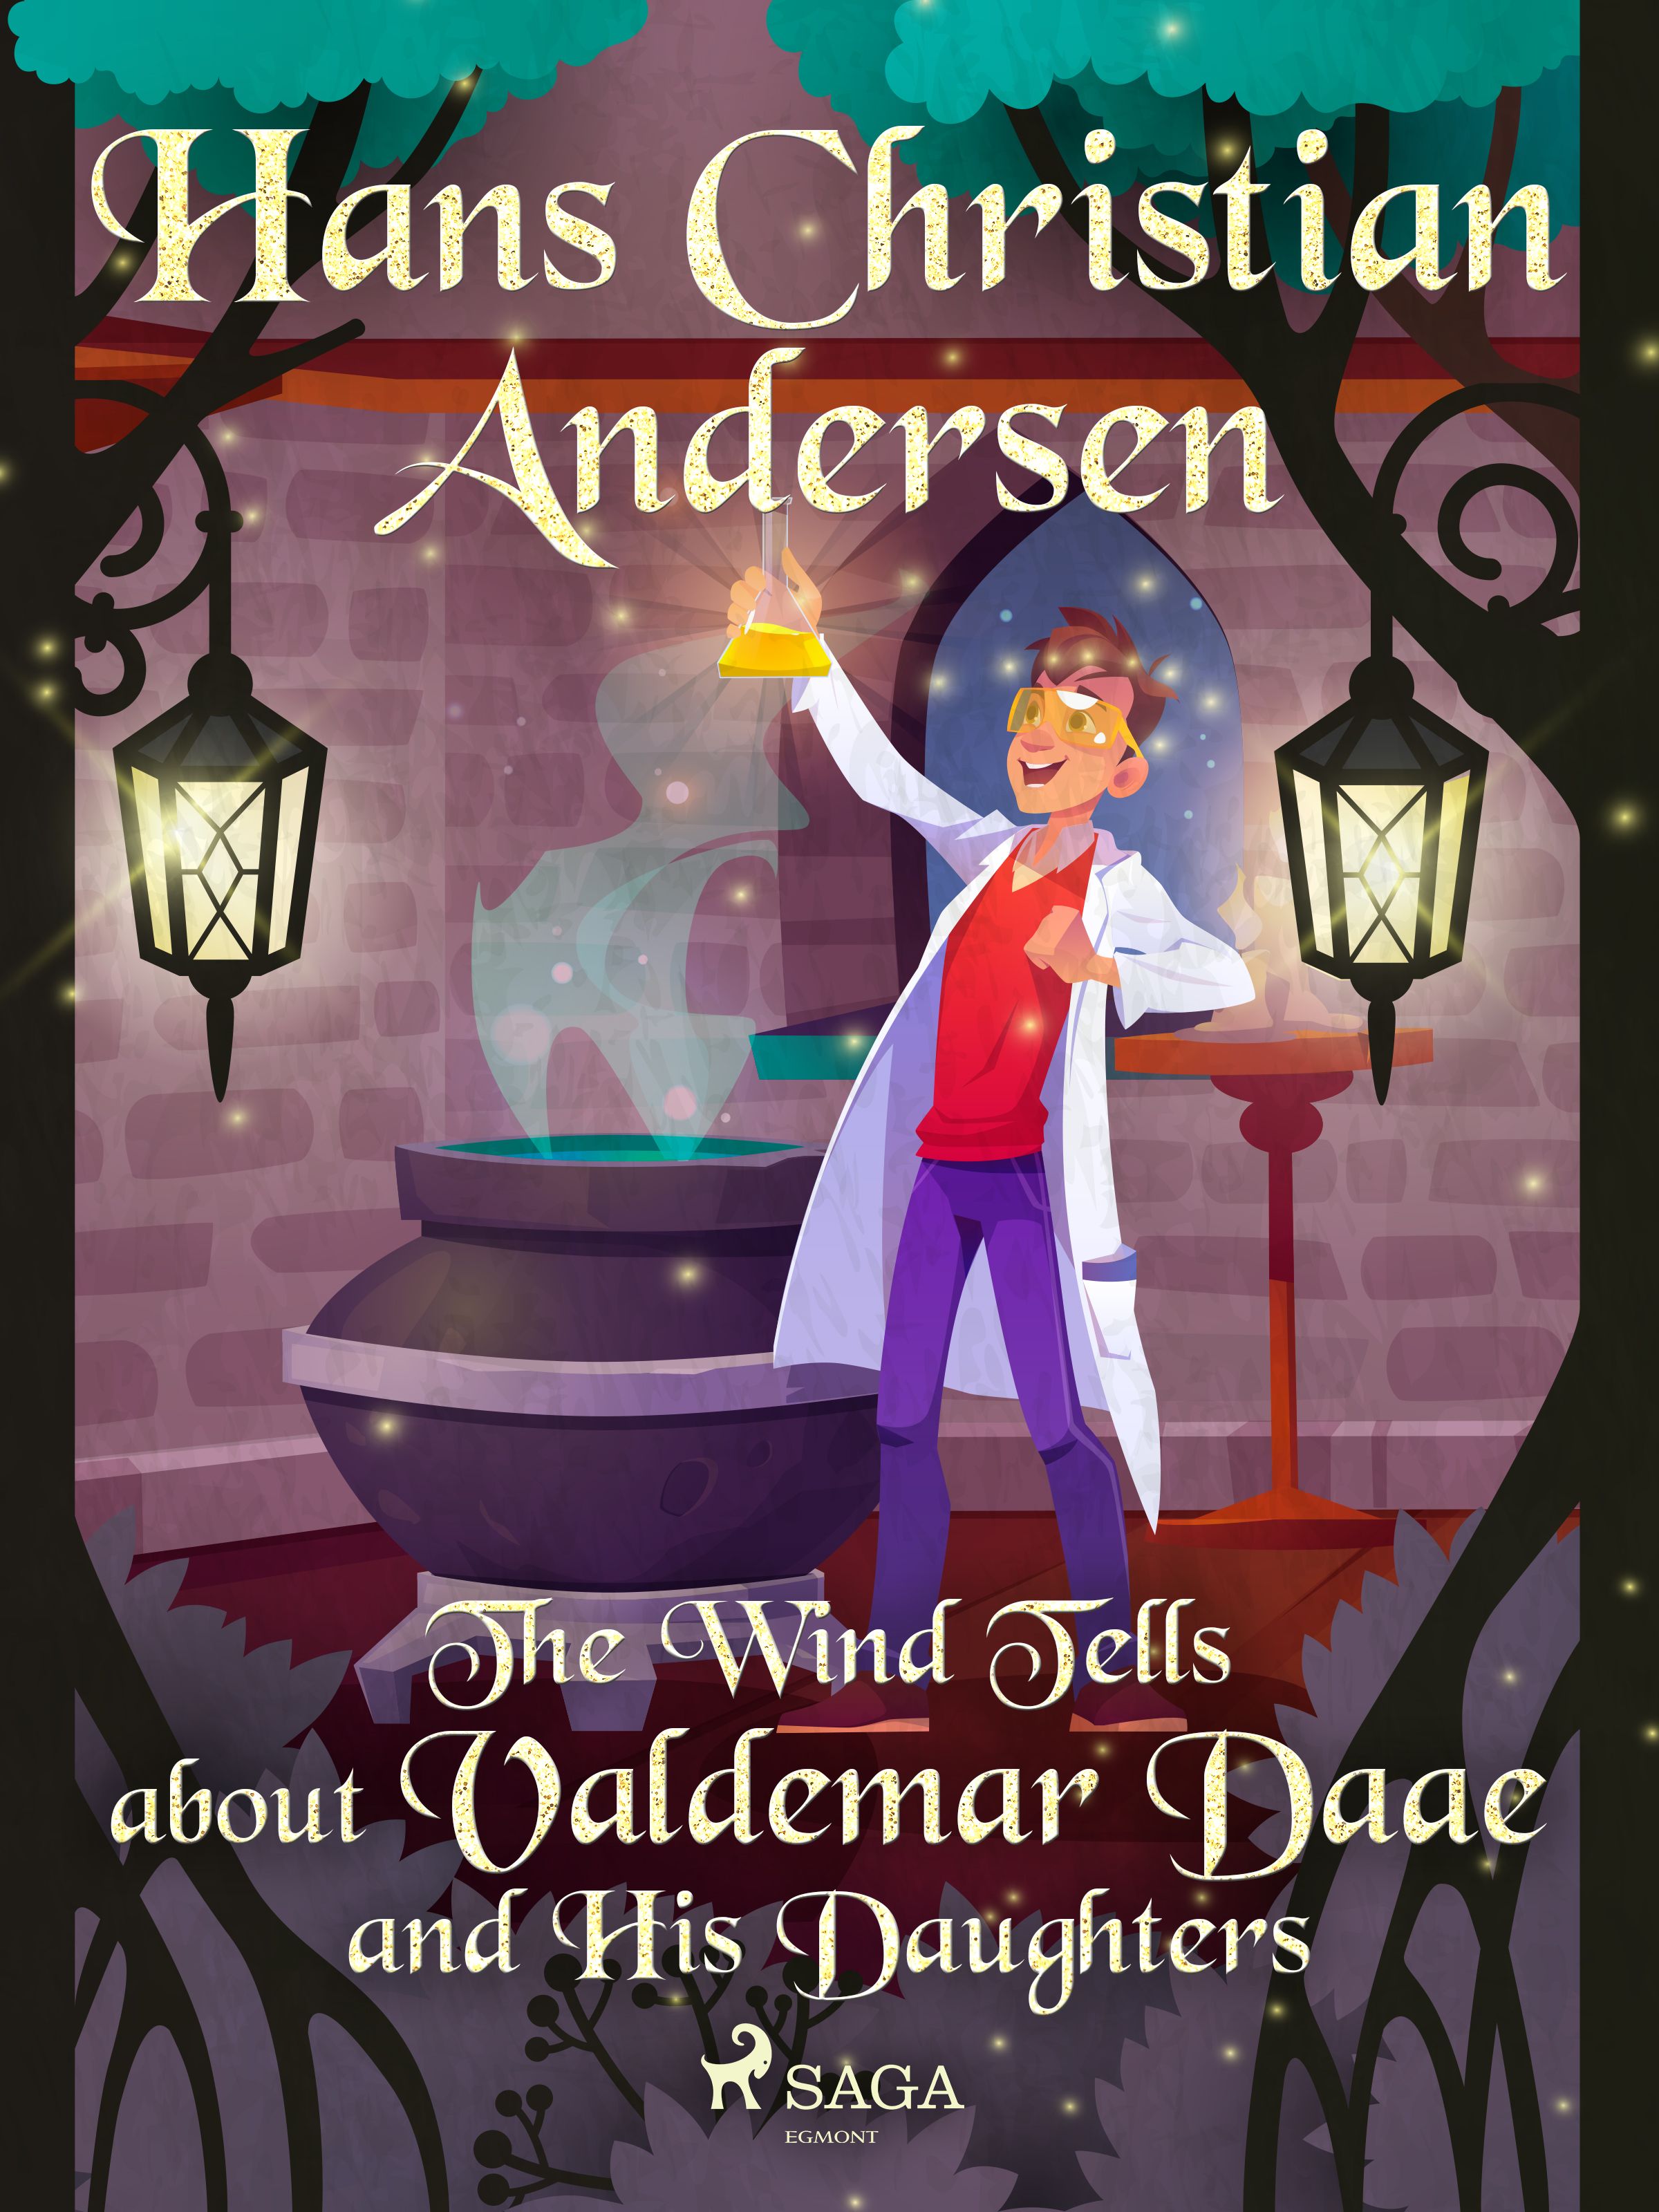 The Wind Tells about Valdemar Daae and His Daughters , eBook by Hans Christian Andersen